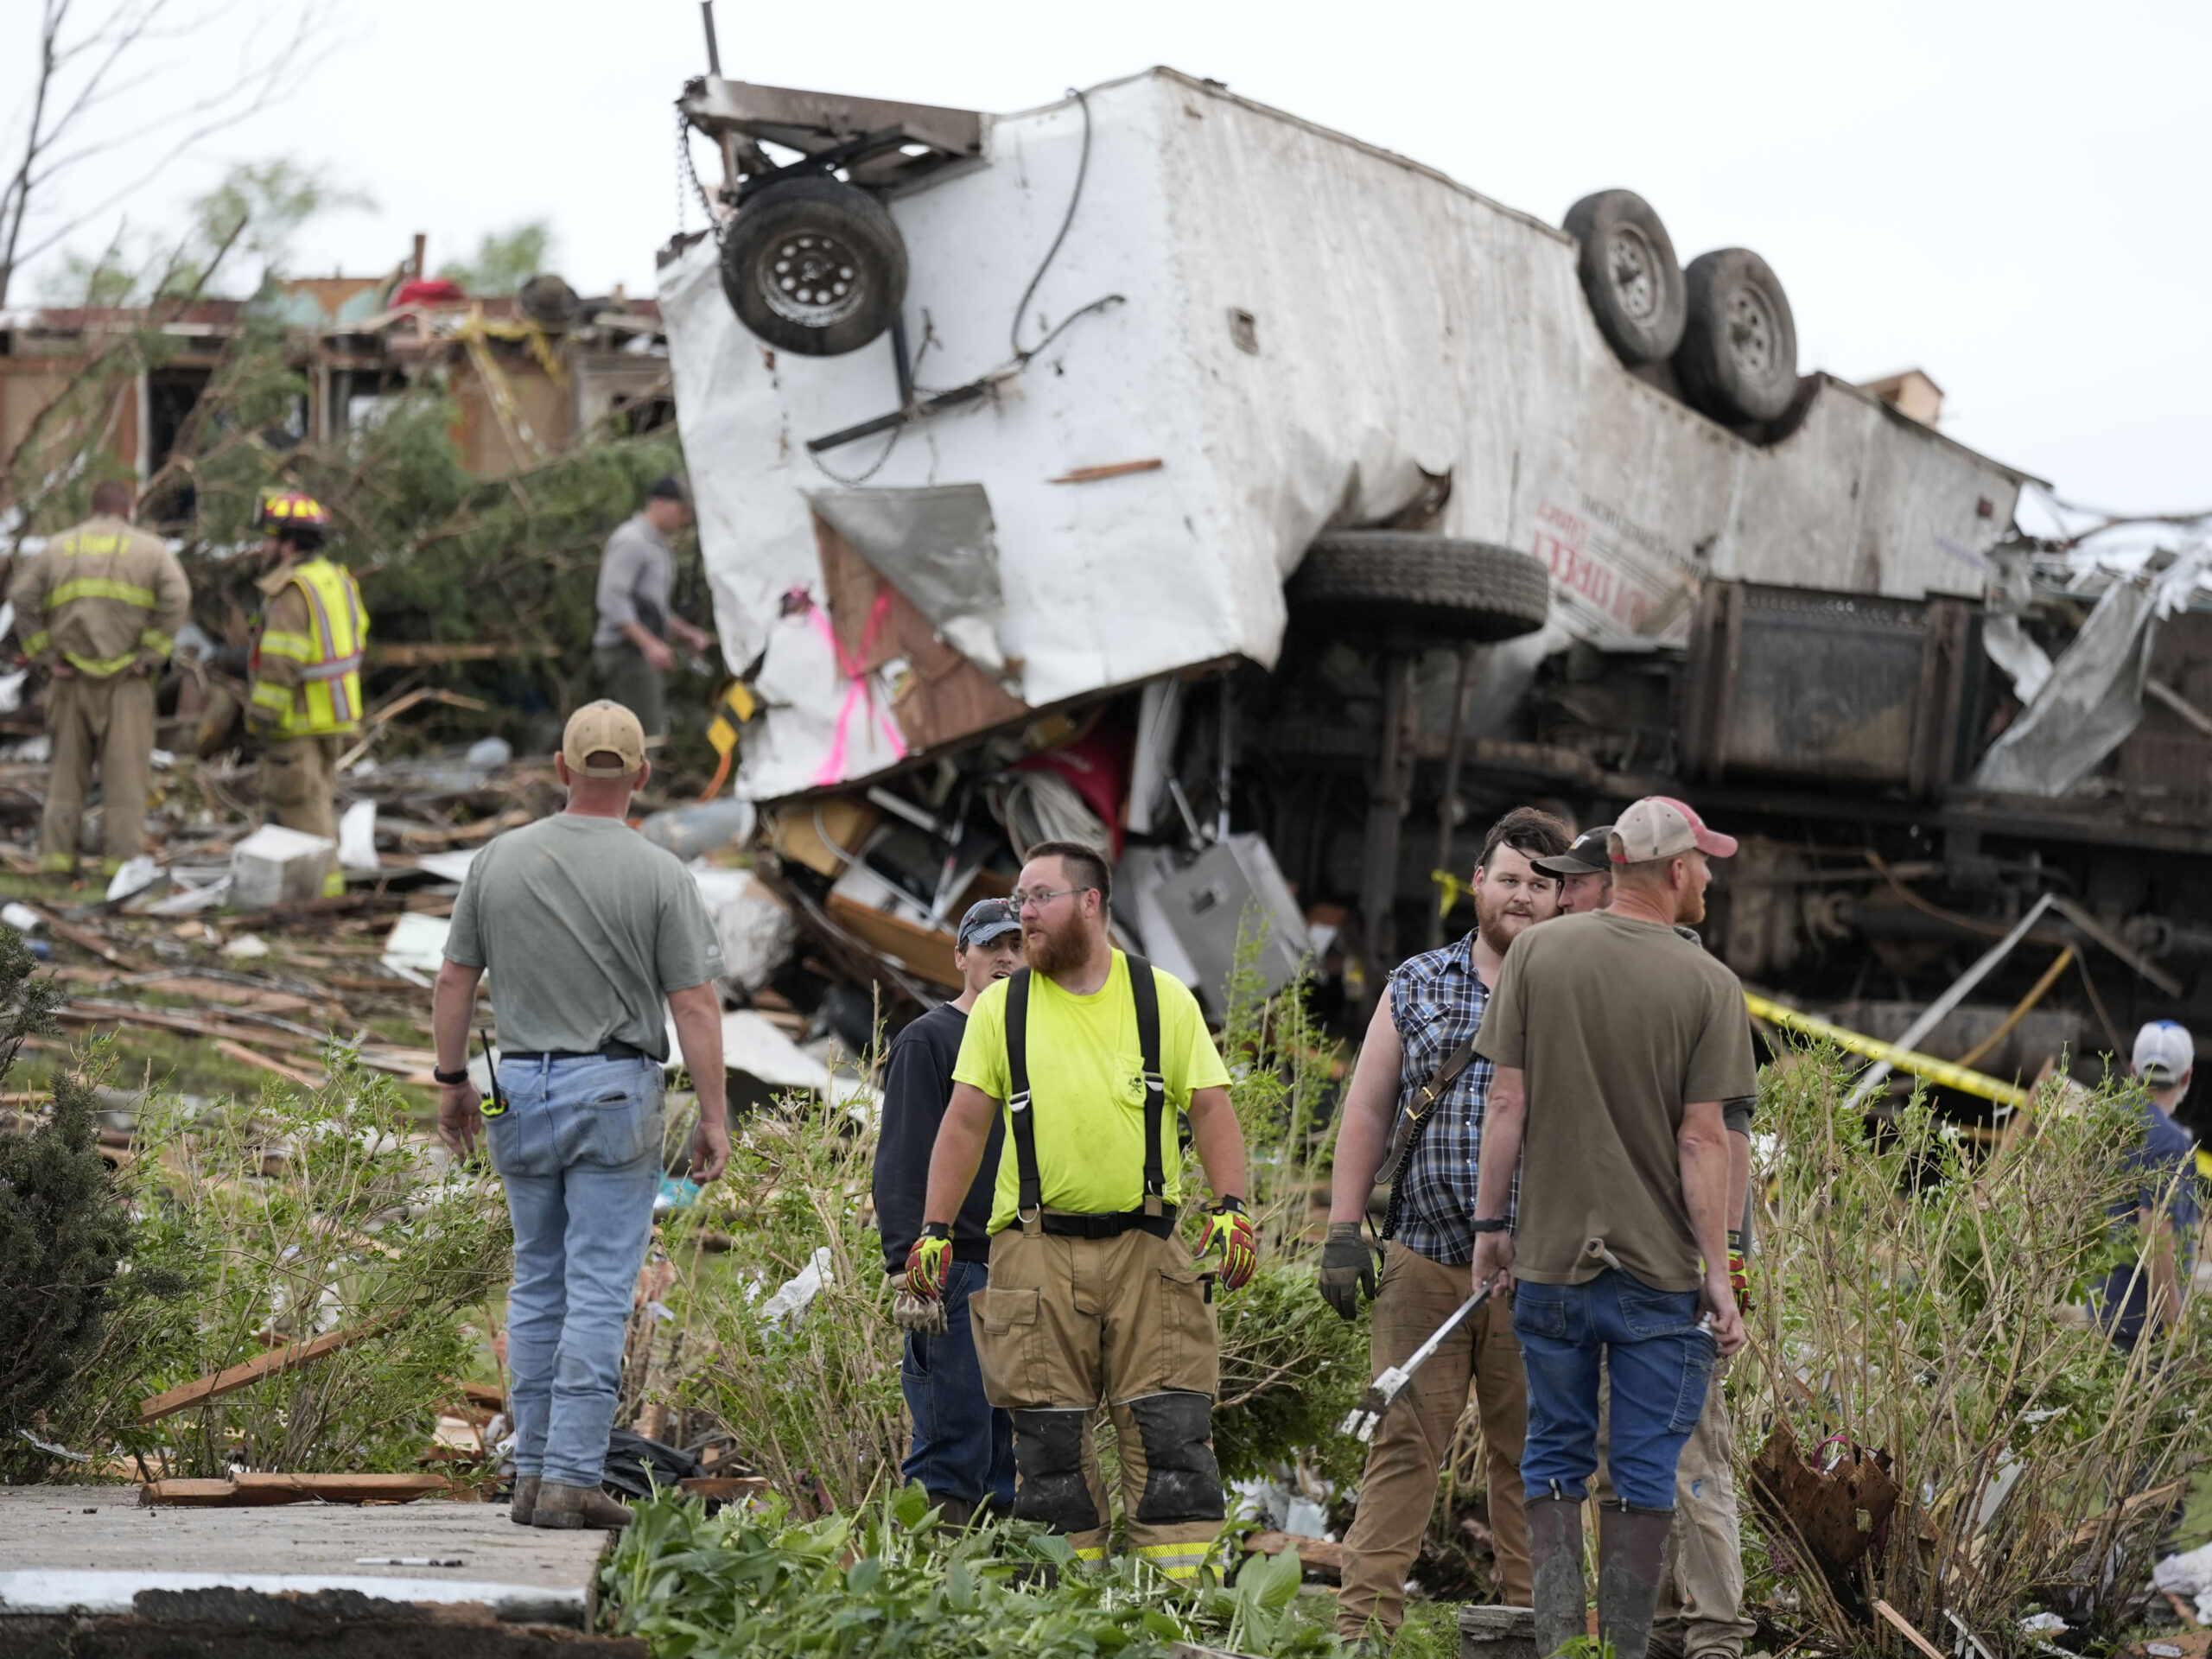 A tornado devastates an Iowa town and kills multiple people, authorities say